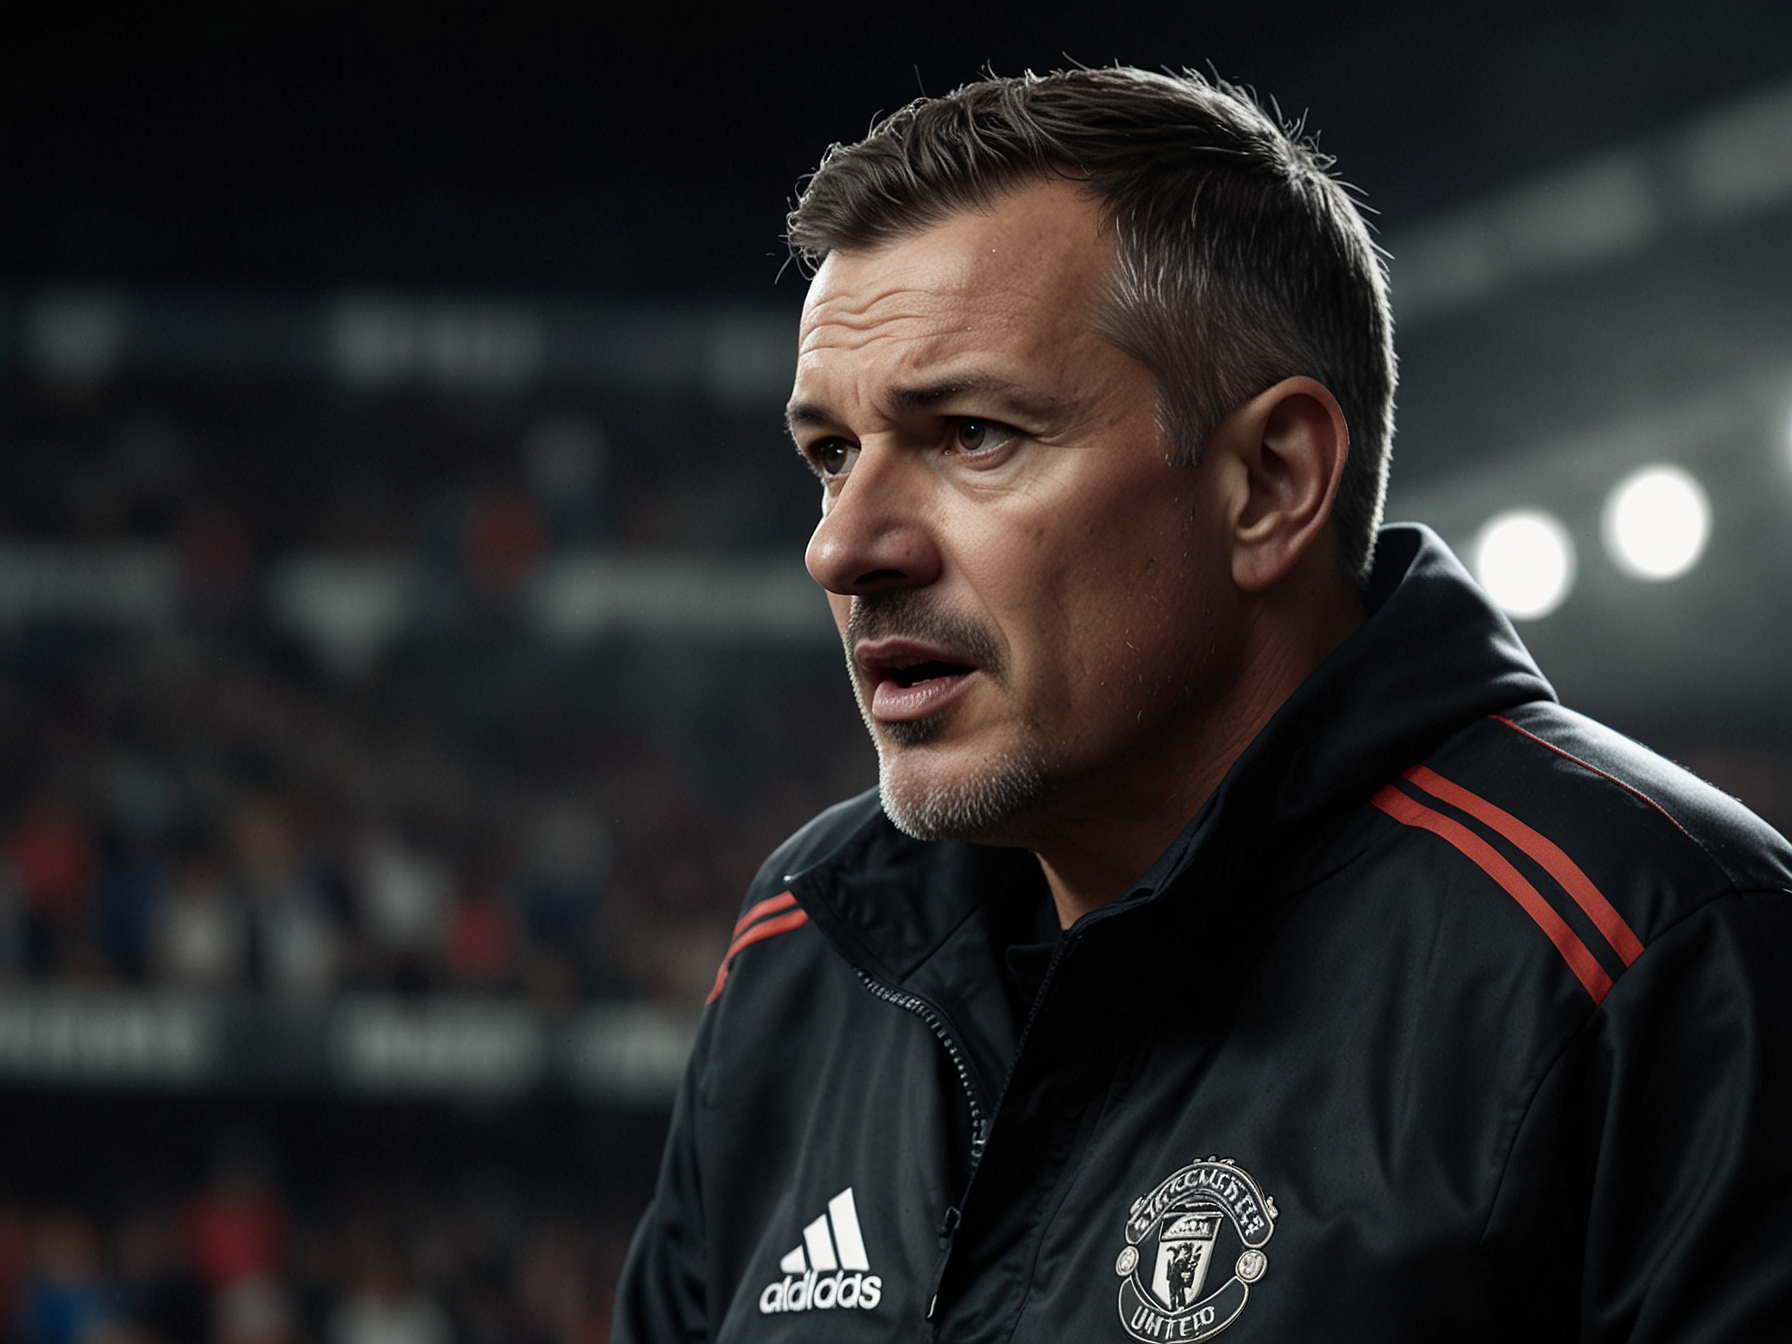 An intense Rene Hake is captured mid-rant in the viral video, expressing dissatisfaction with his players' performance. His passionate and direct coaching style could be a game-changer for Manchester United.